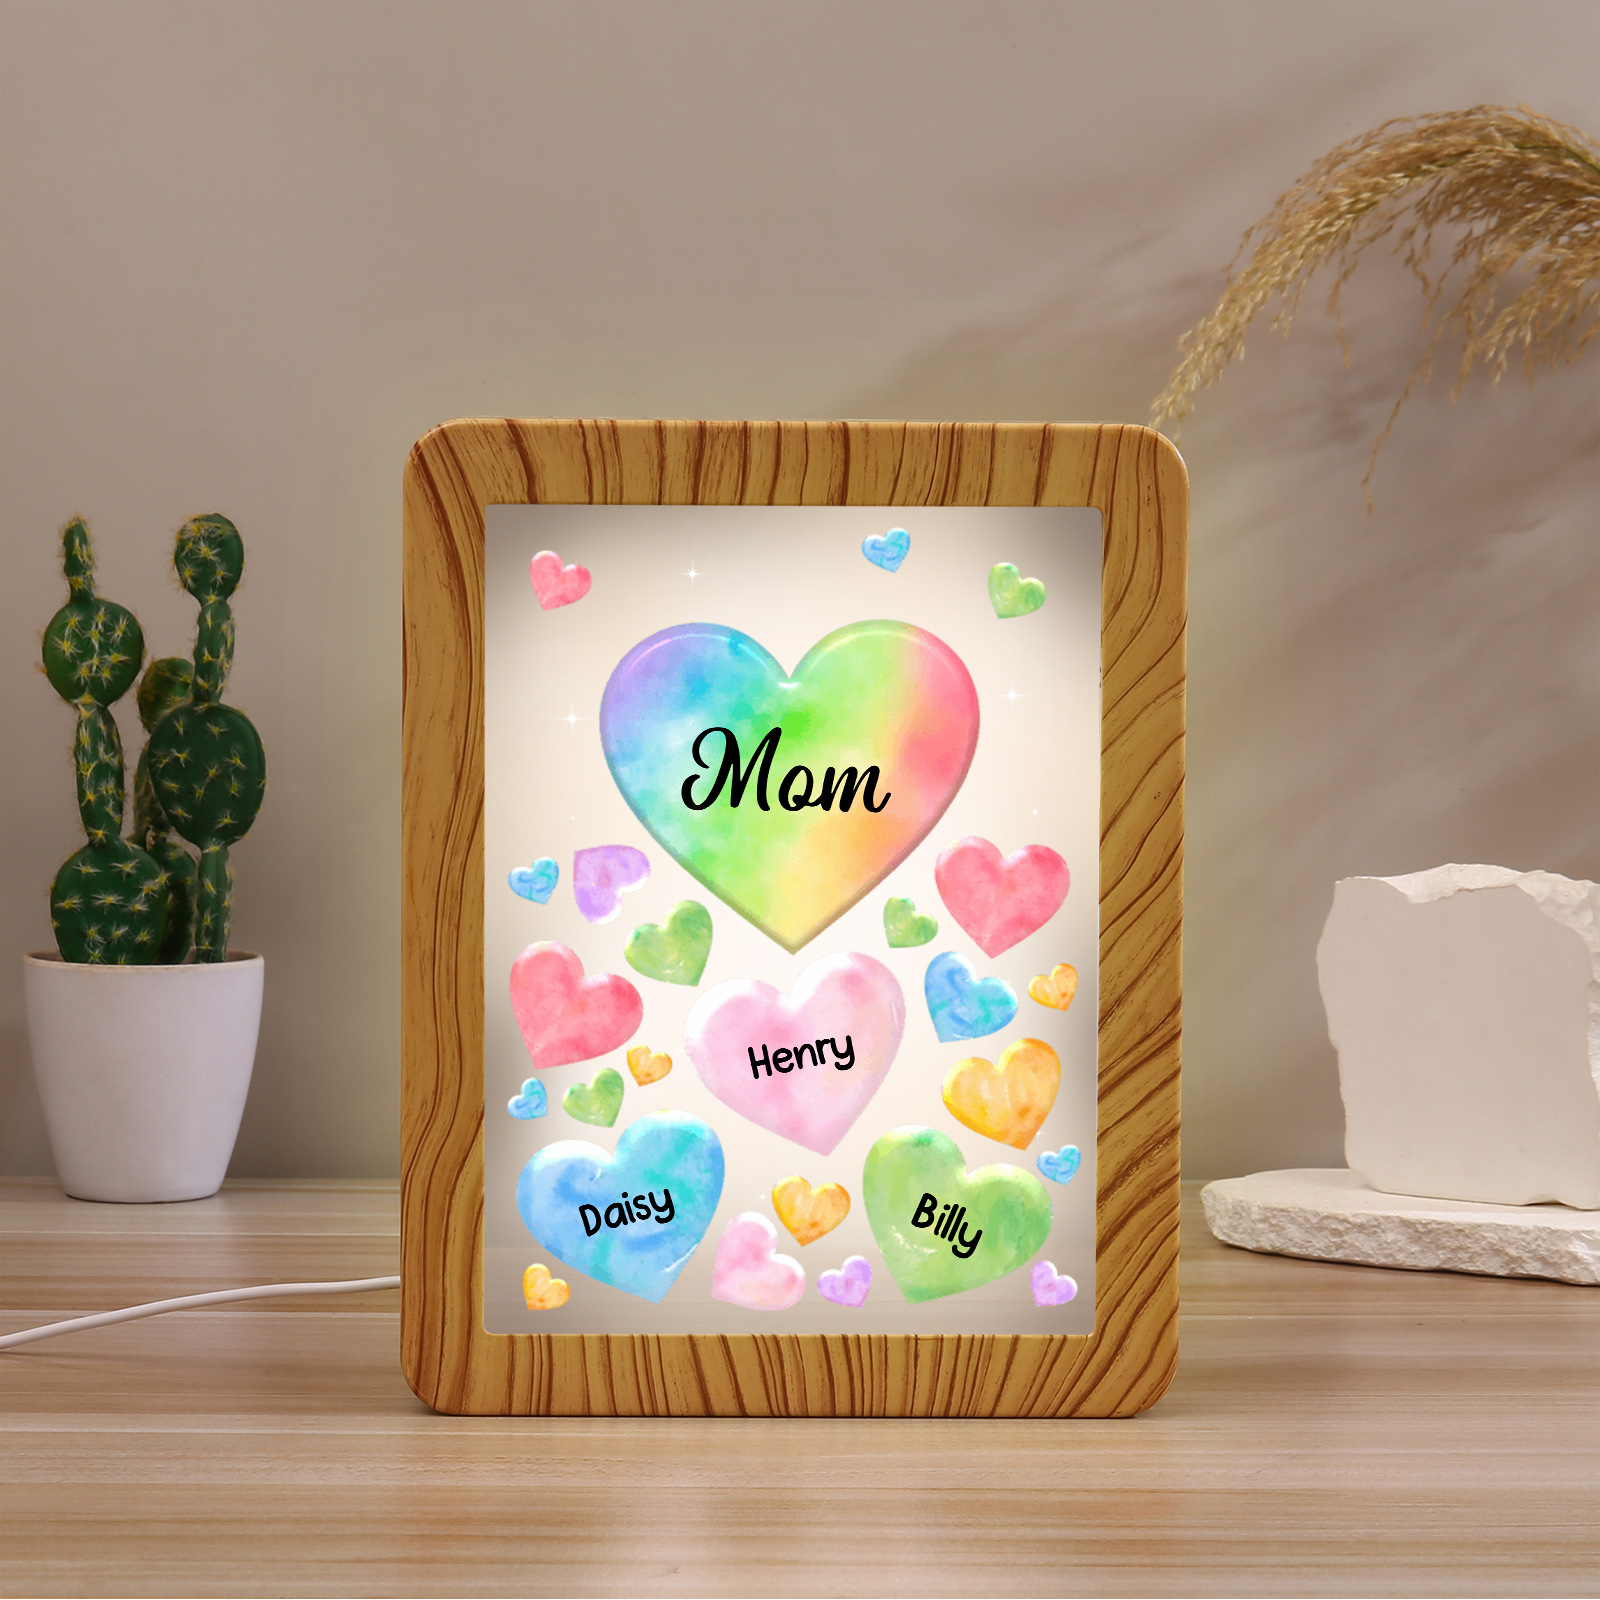 3 Name - Personalized Mum Home Wood Color Plug-in Mirror Photo Frame Custom Text LED Night Light Gift for Mum